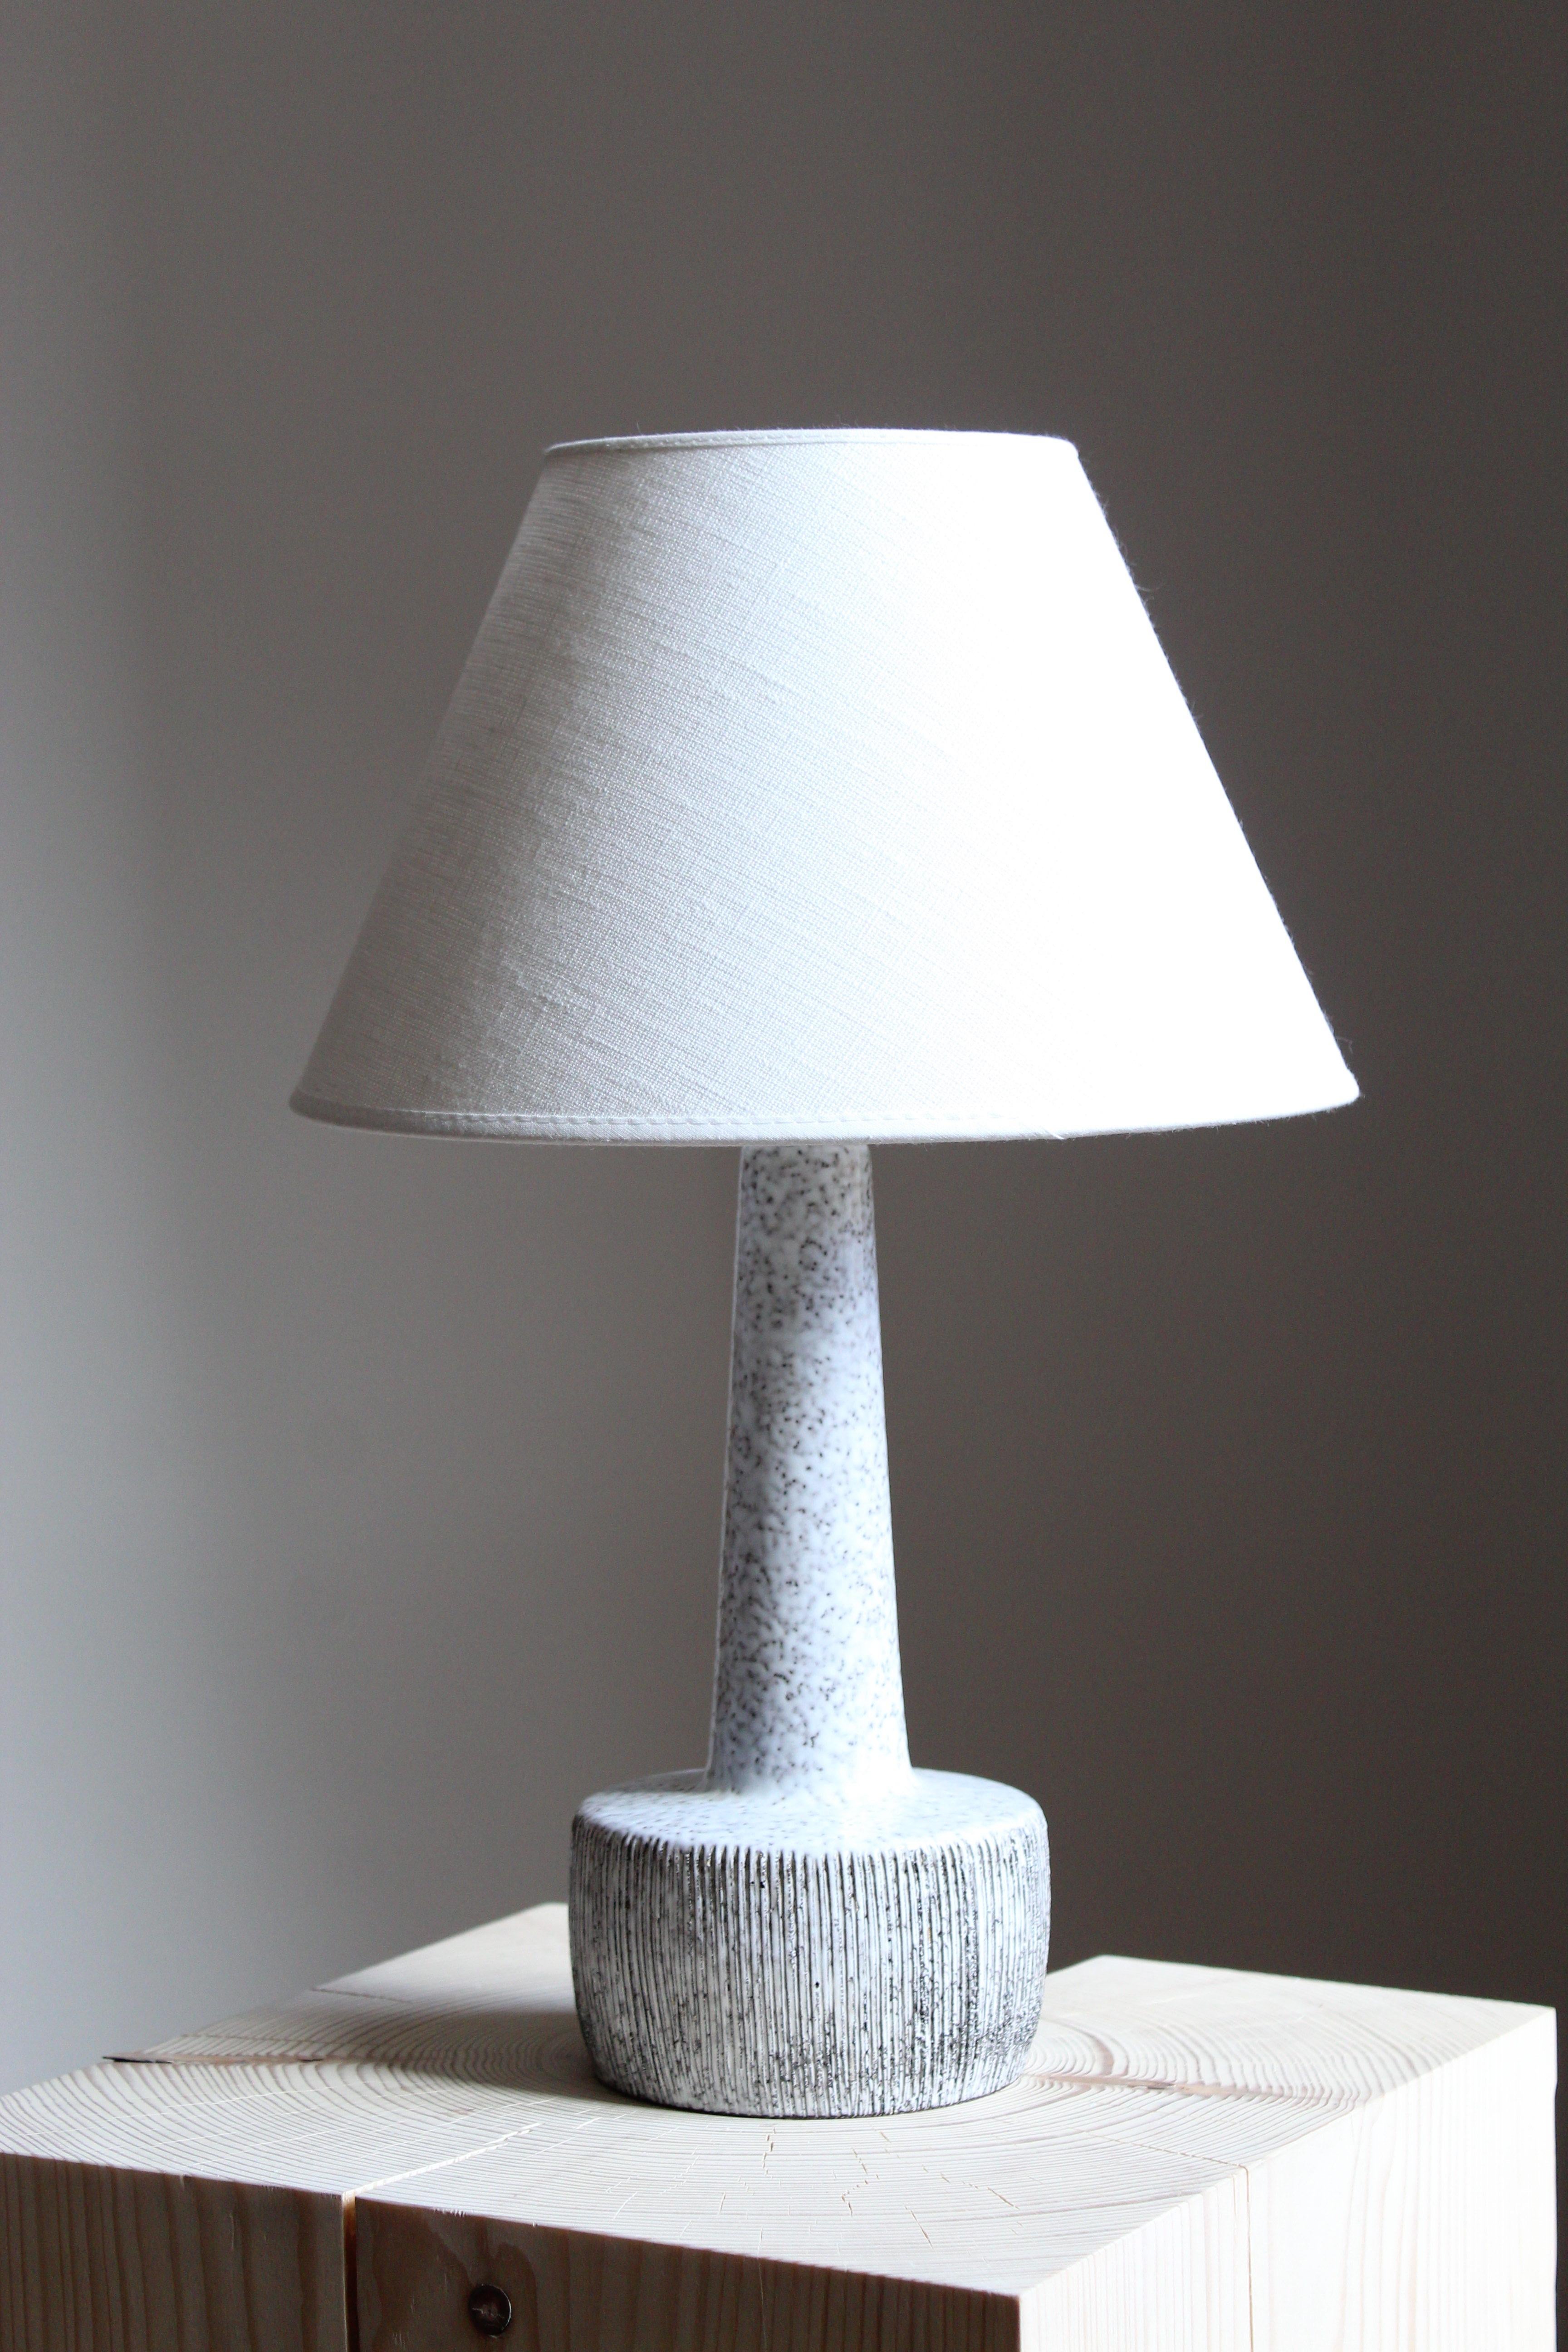 A table lamp. Designed and produced by unknown designer / studio potter. Denmark 1960s. Unsigned. Lampshade not included.

Glaze features a white color with hints of brown.